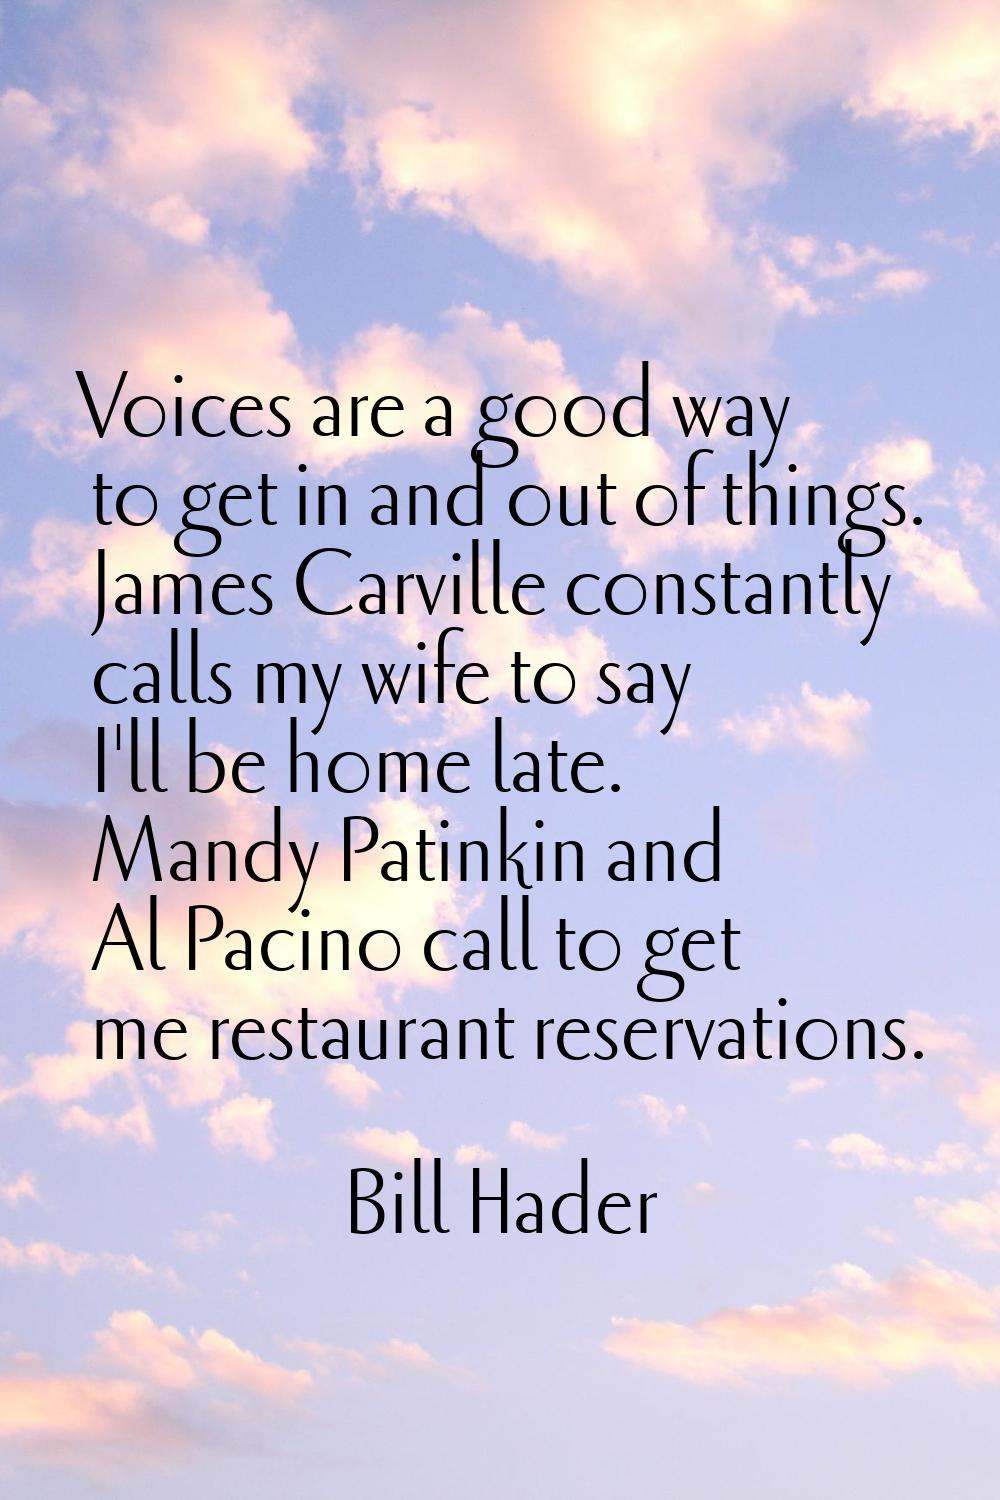 Voices are a good way to get in and out of things. James Carville constantly calls my wife to say I